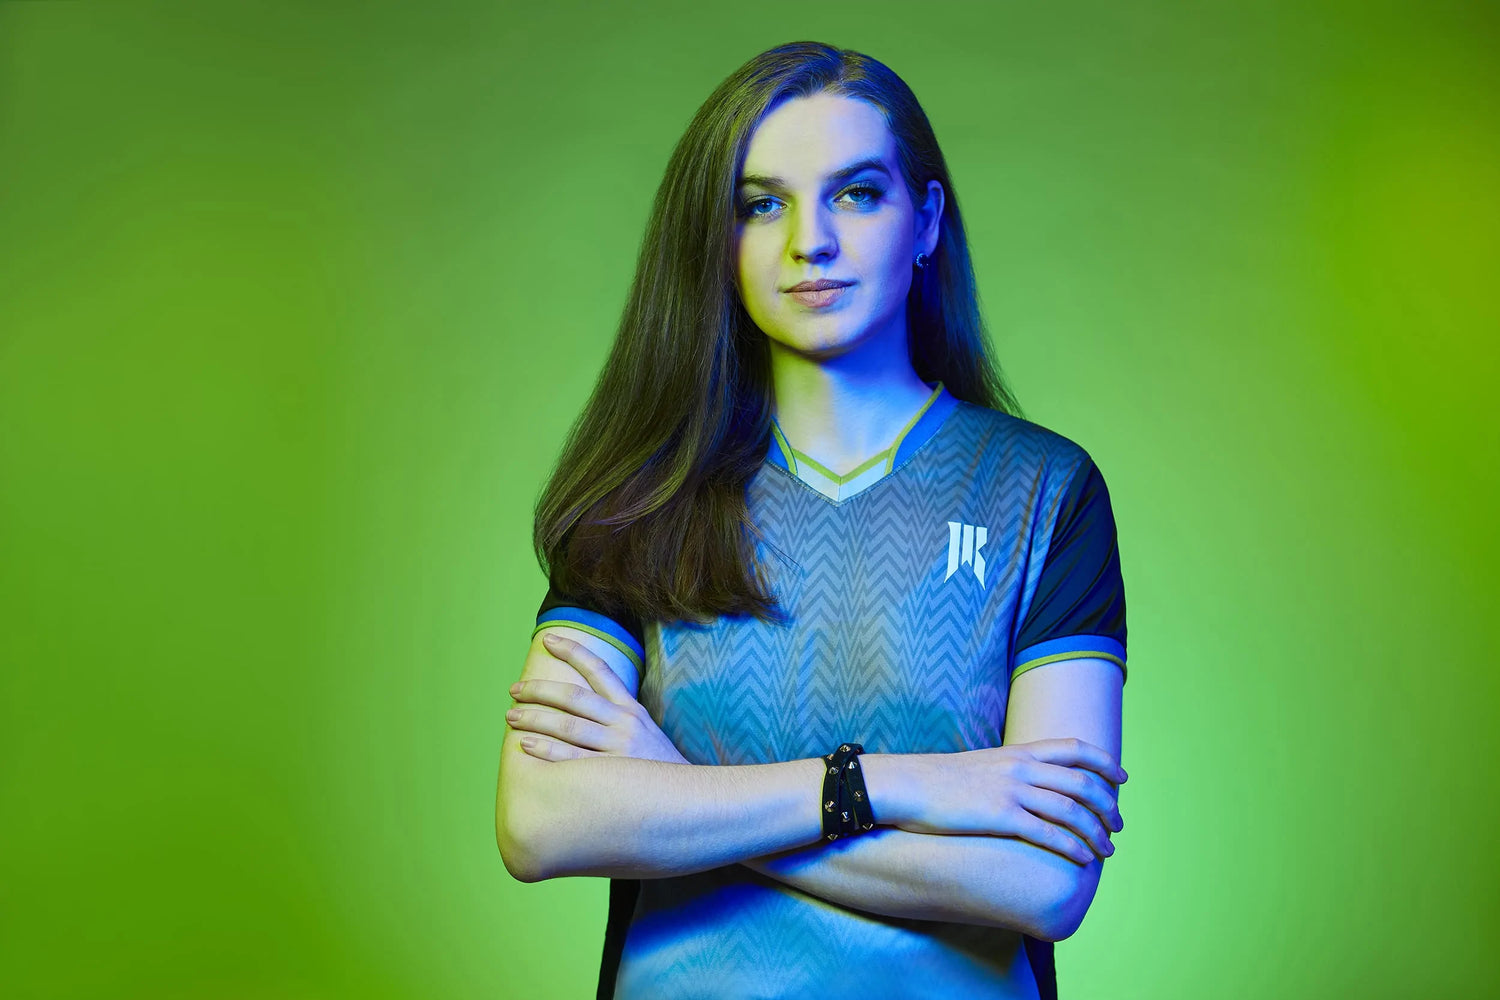 Player (Scarlett) with a Rebellion jersey and a green background